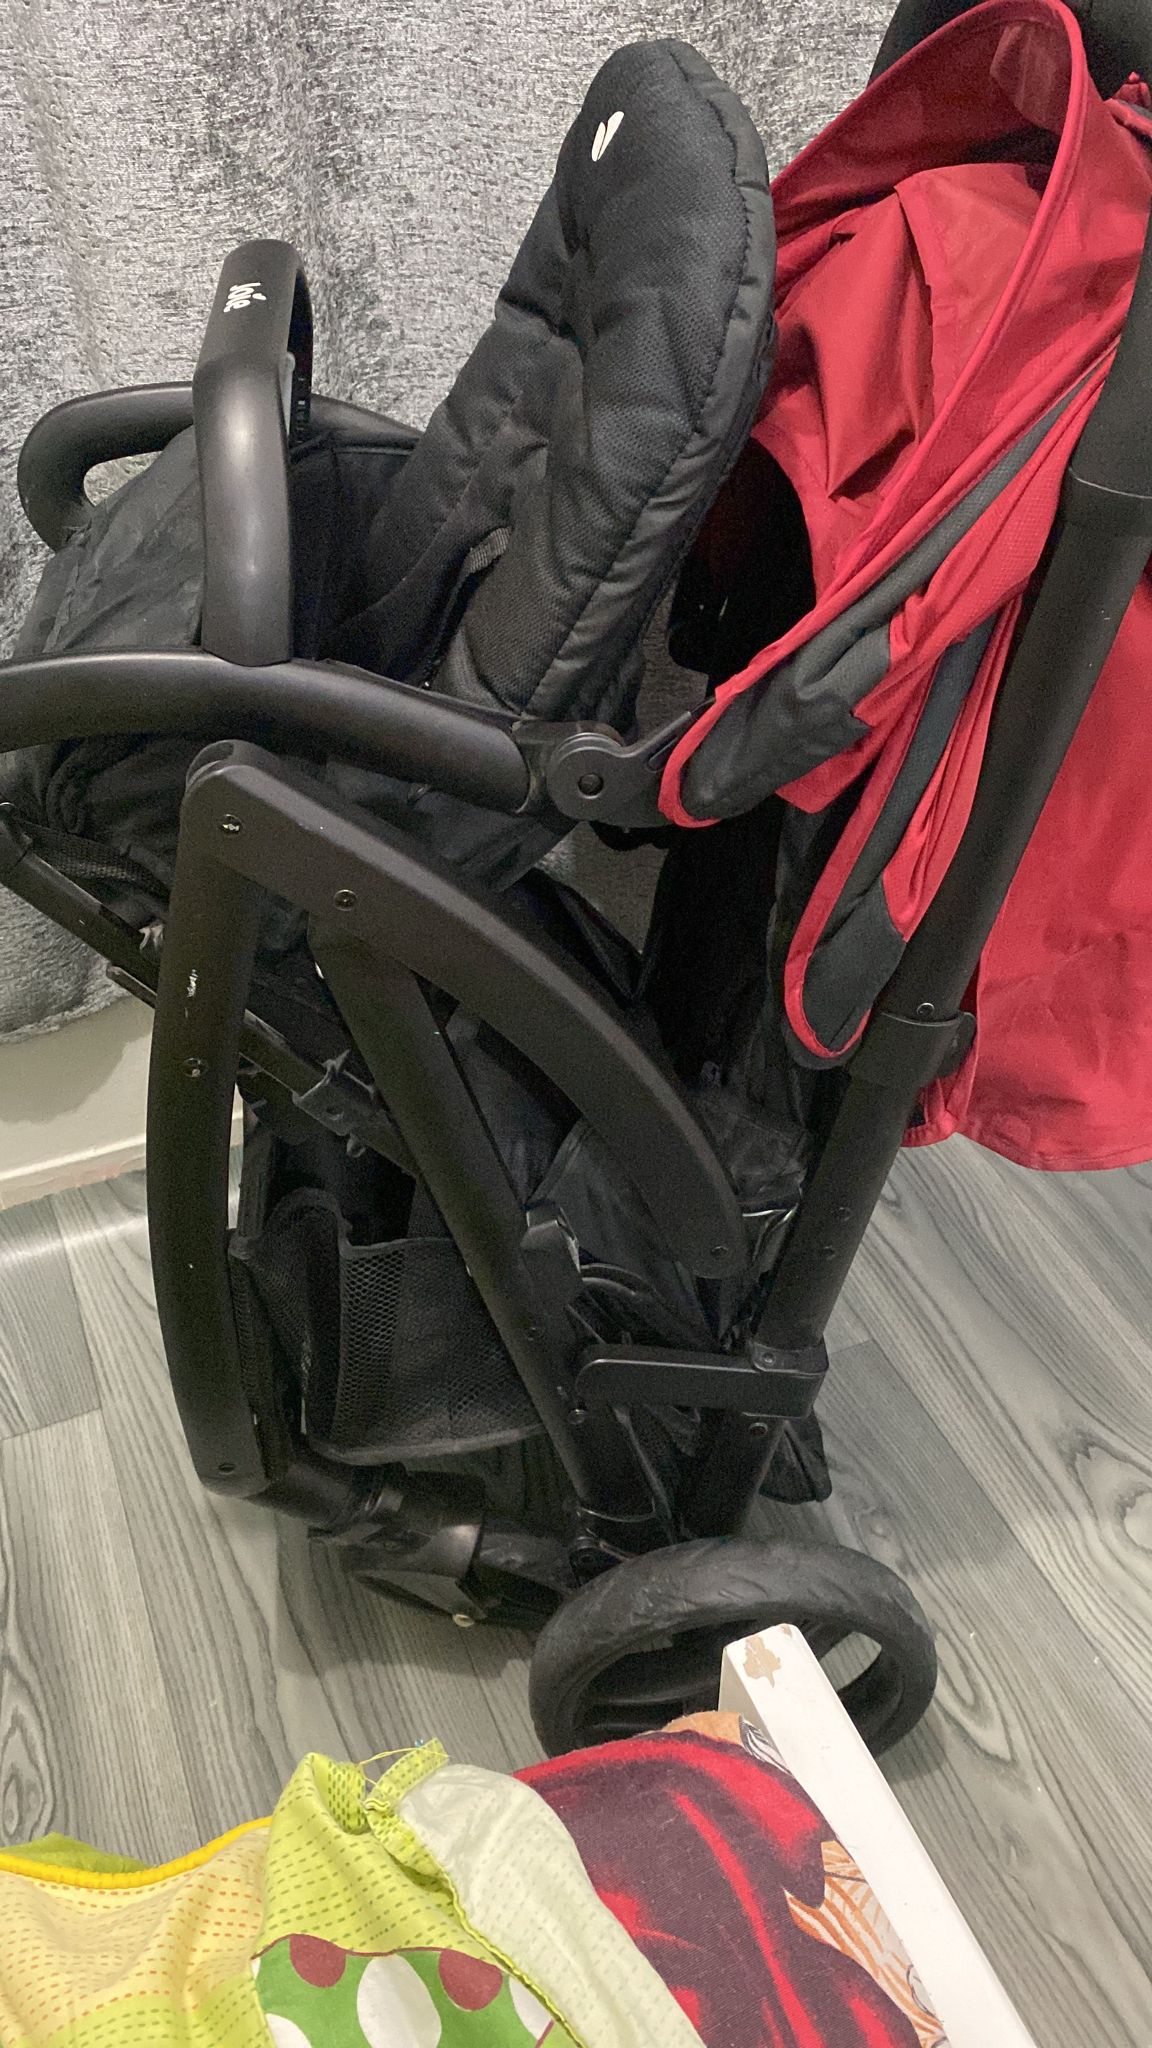 Baby twin stroller for sale